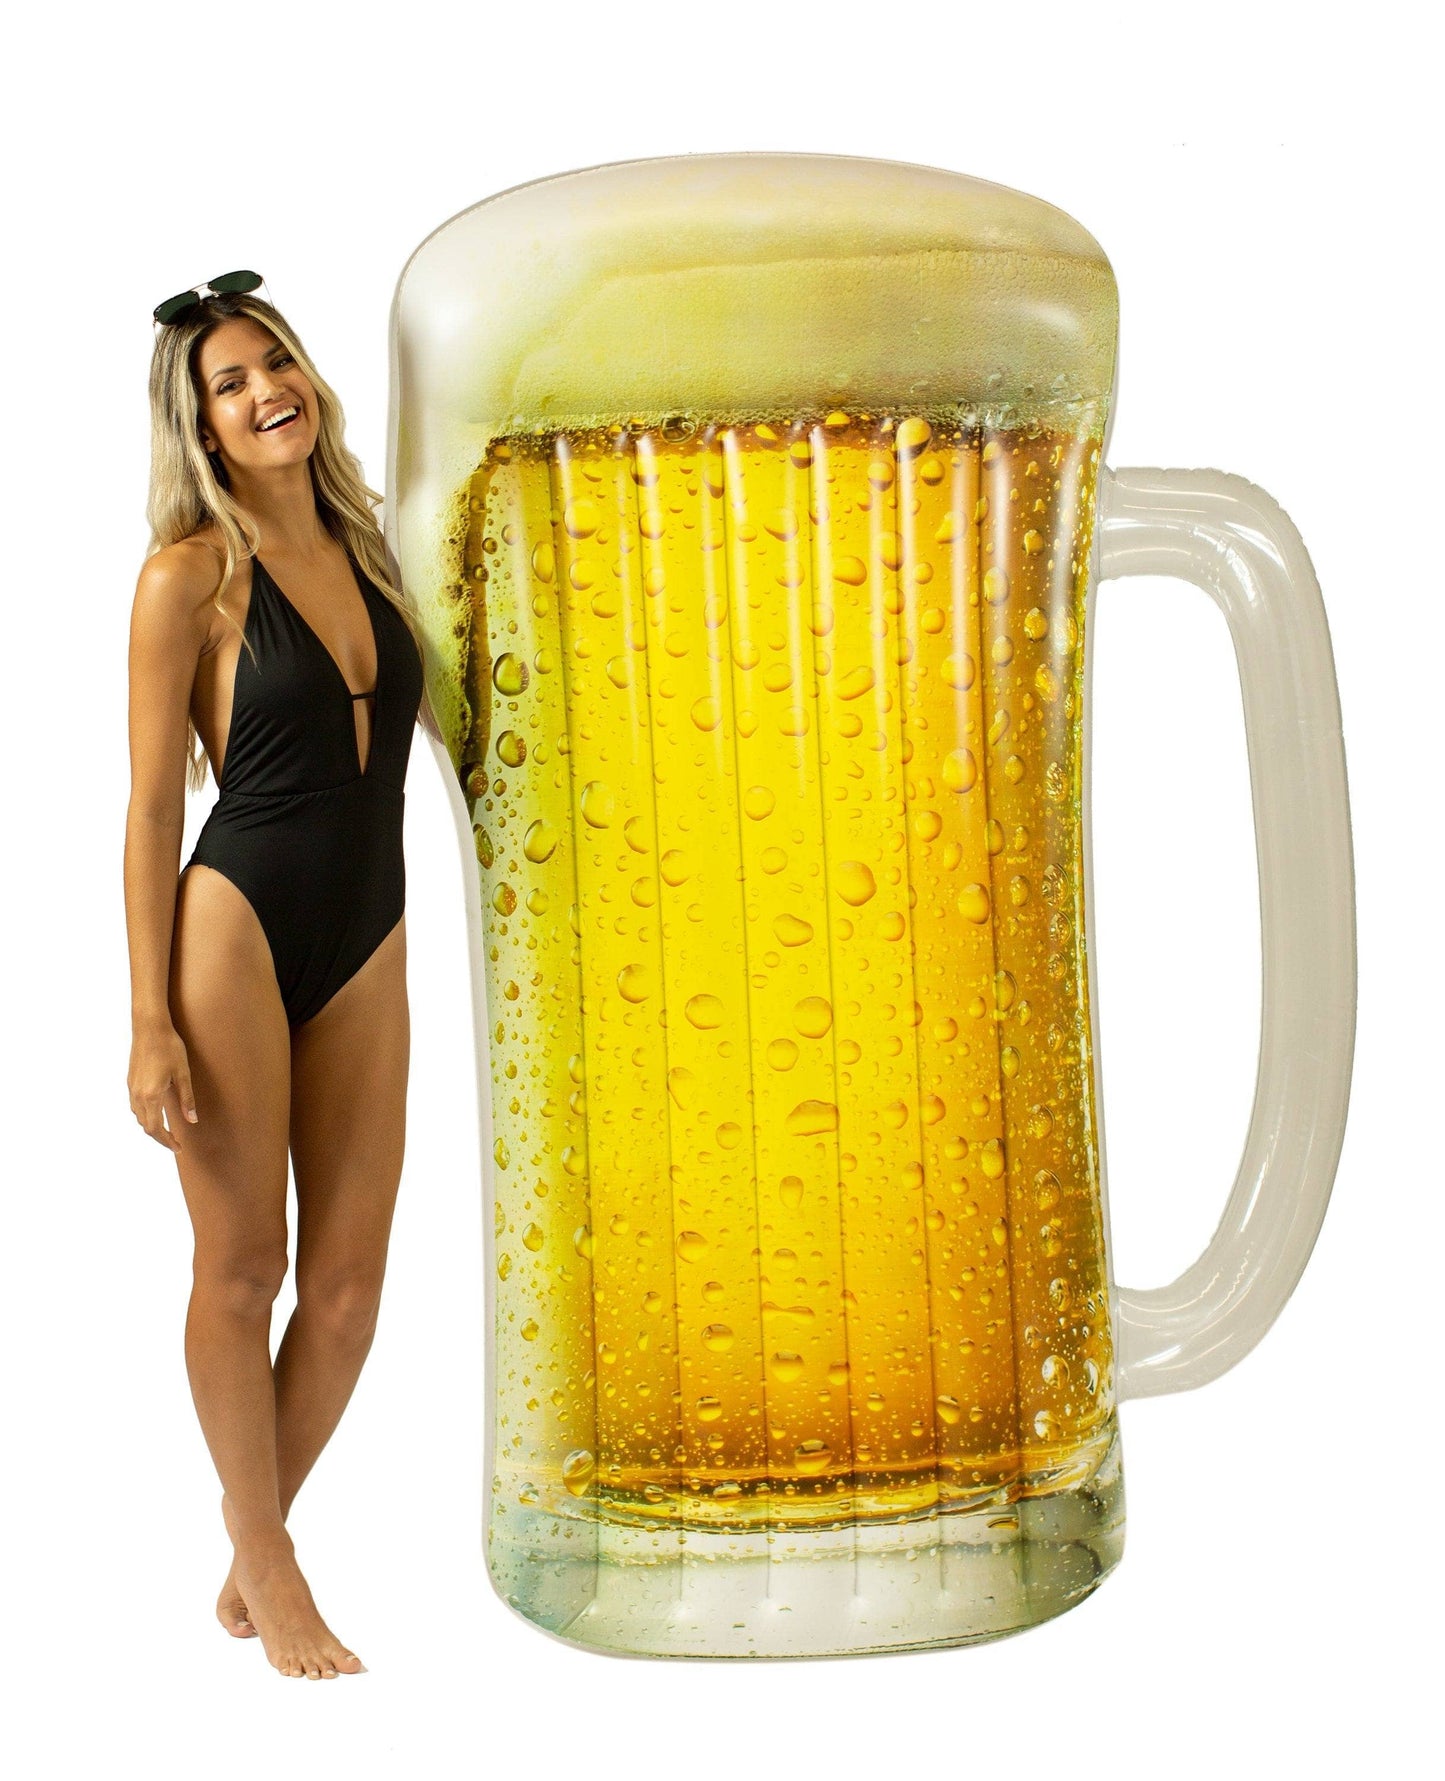 Bachelor Party Supplies - Brewzies Inflatable Beer Bra